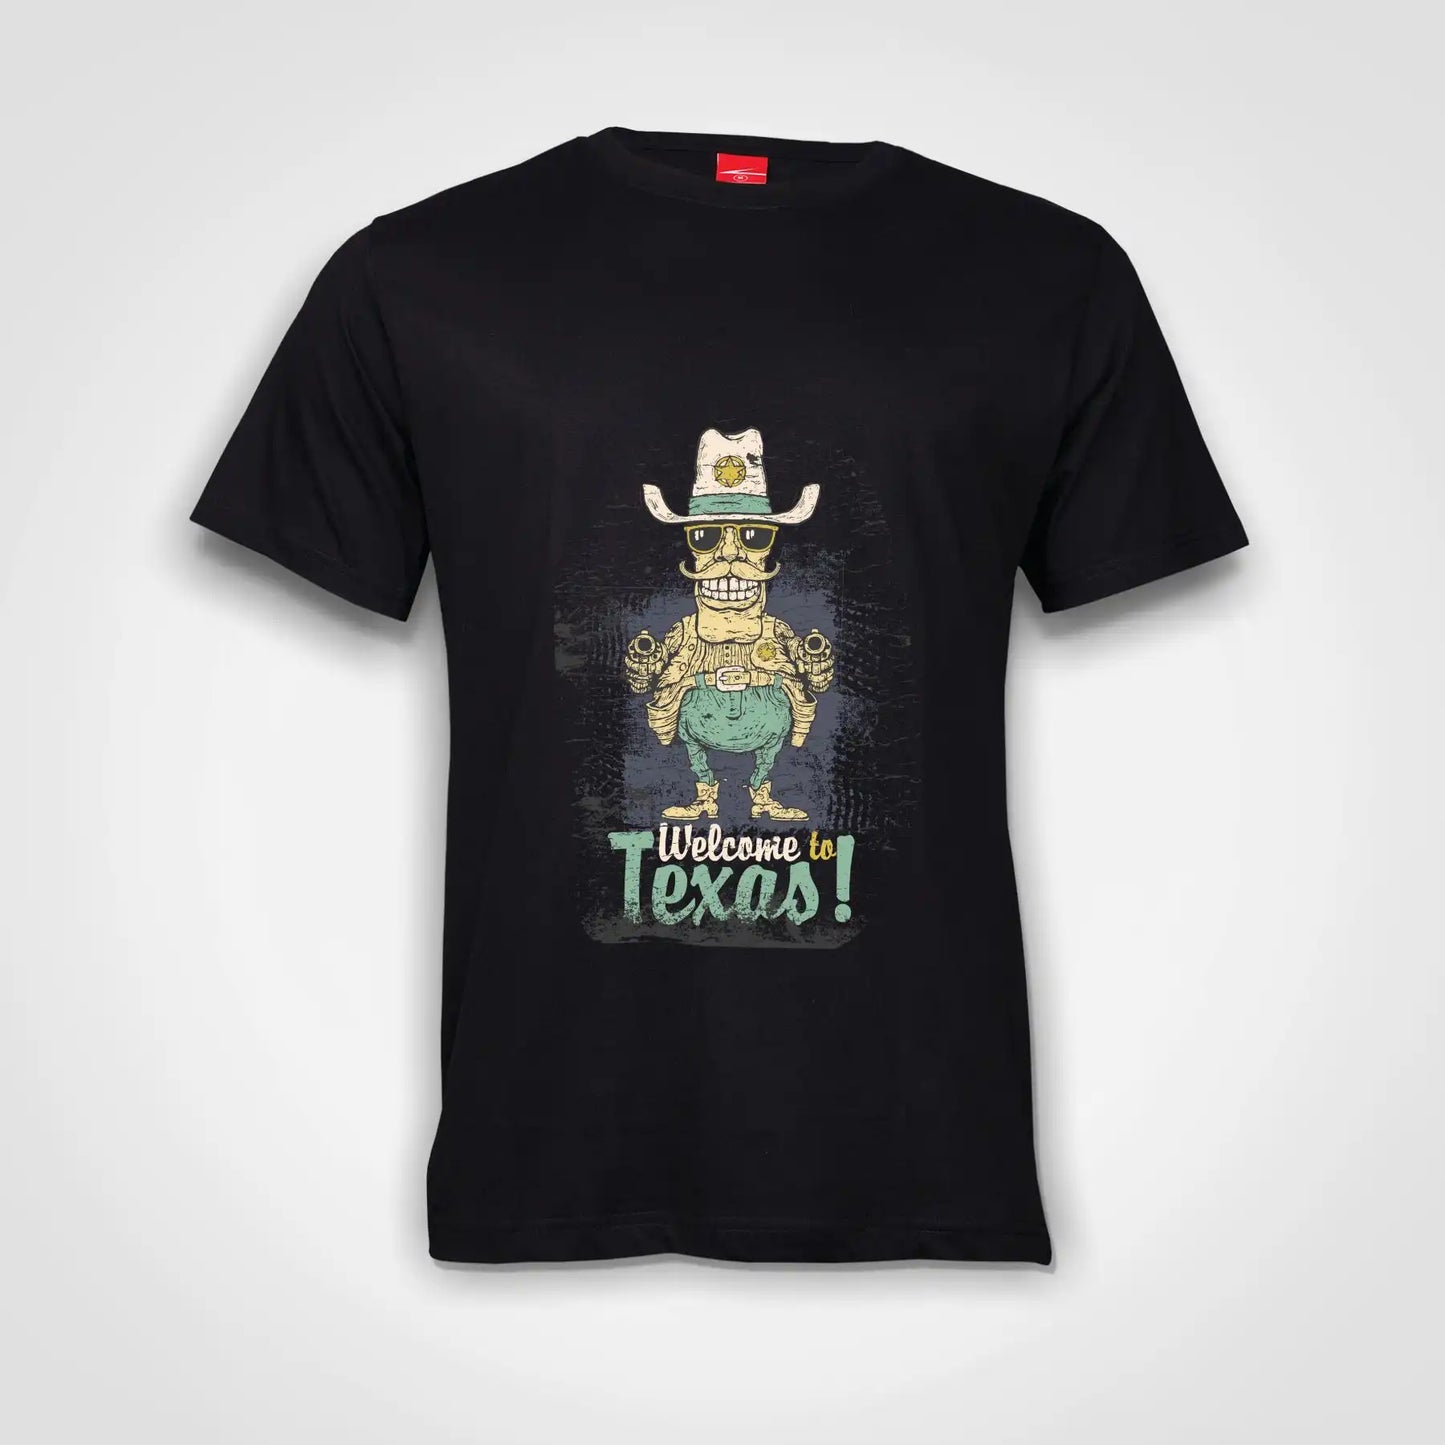 Welcome To Texas Cotton T-Shirt Black IZZIT APPAREL